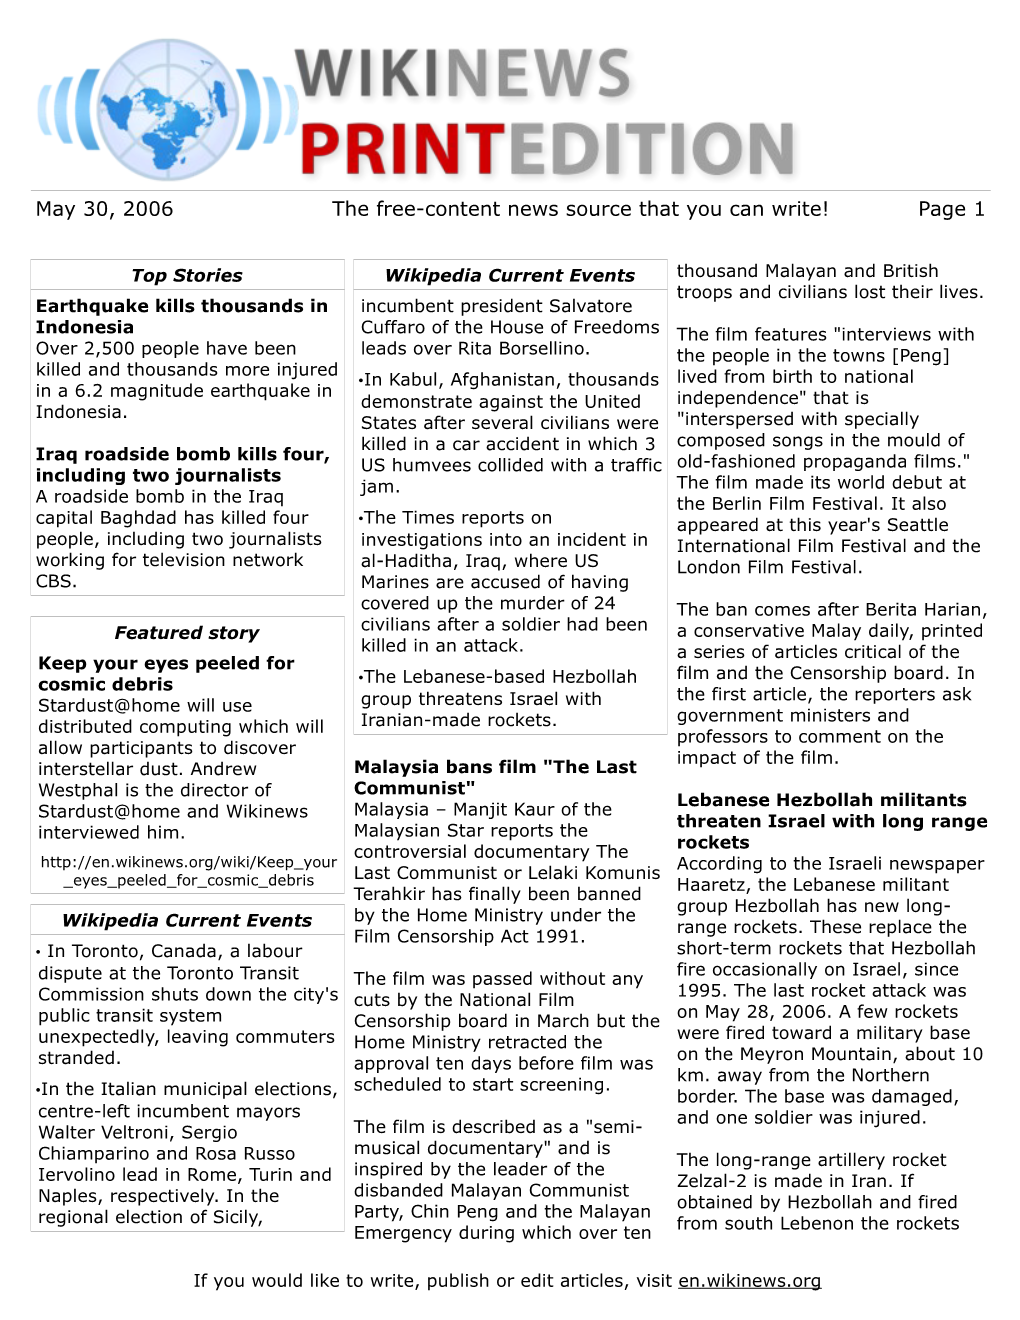 May 30, 2006 the Free-Content News Source That You Can Write! Page 1